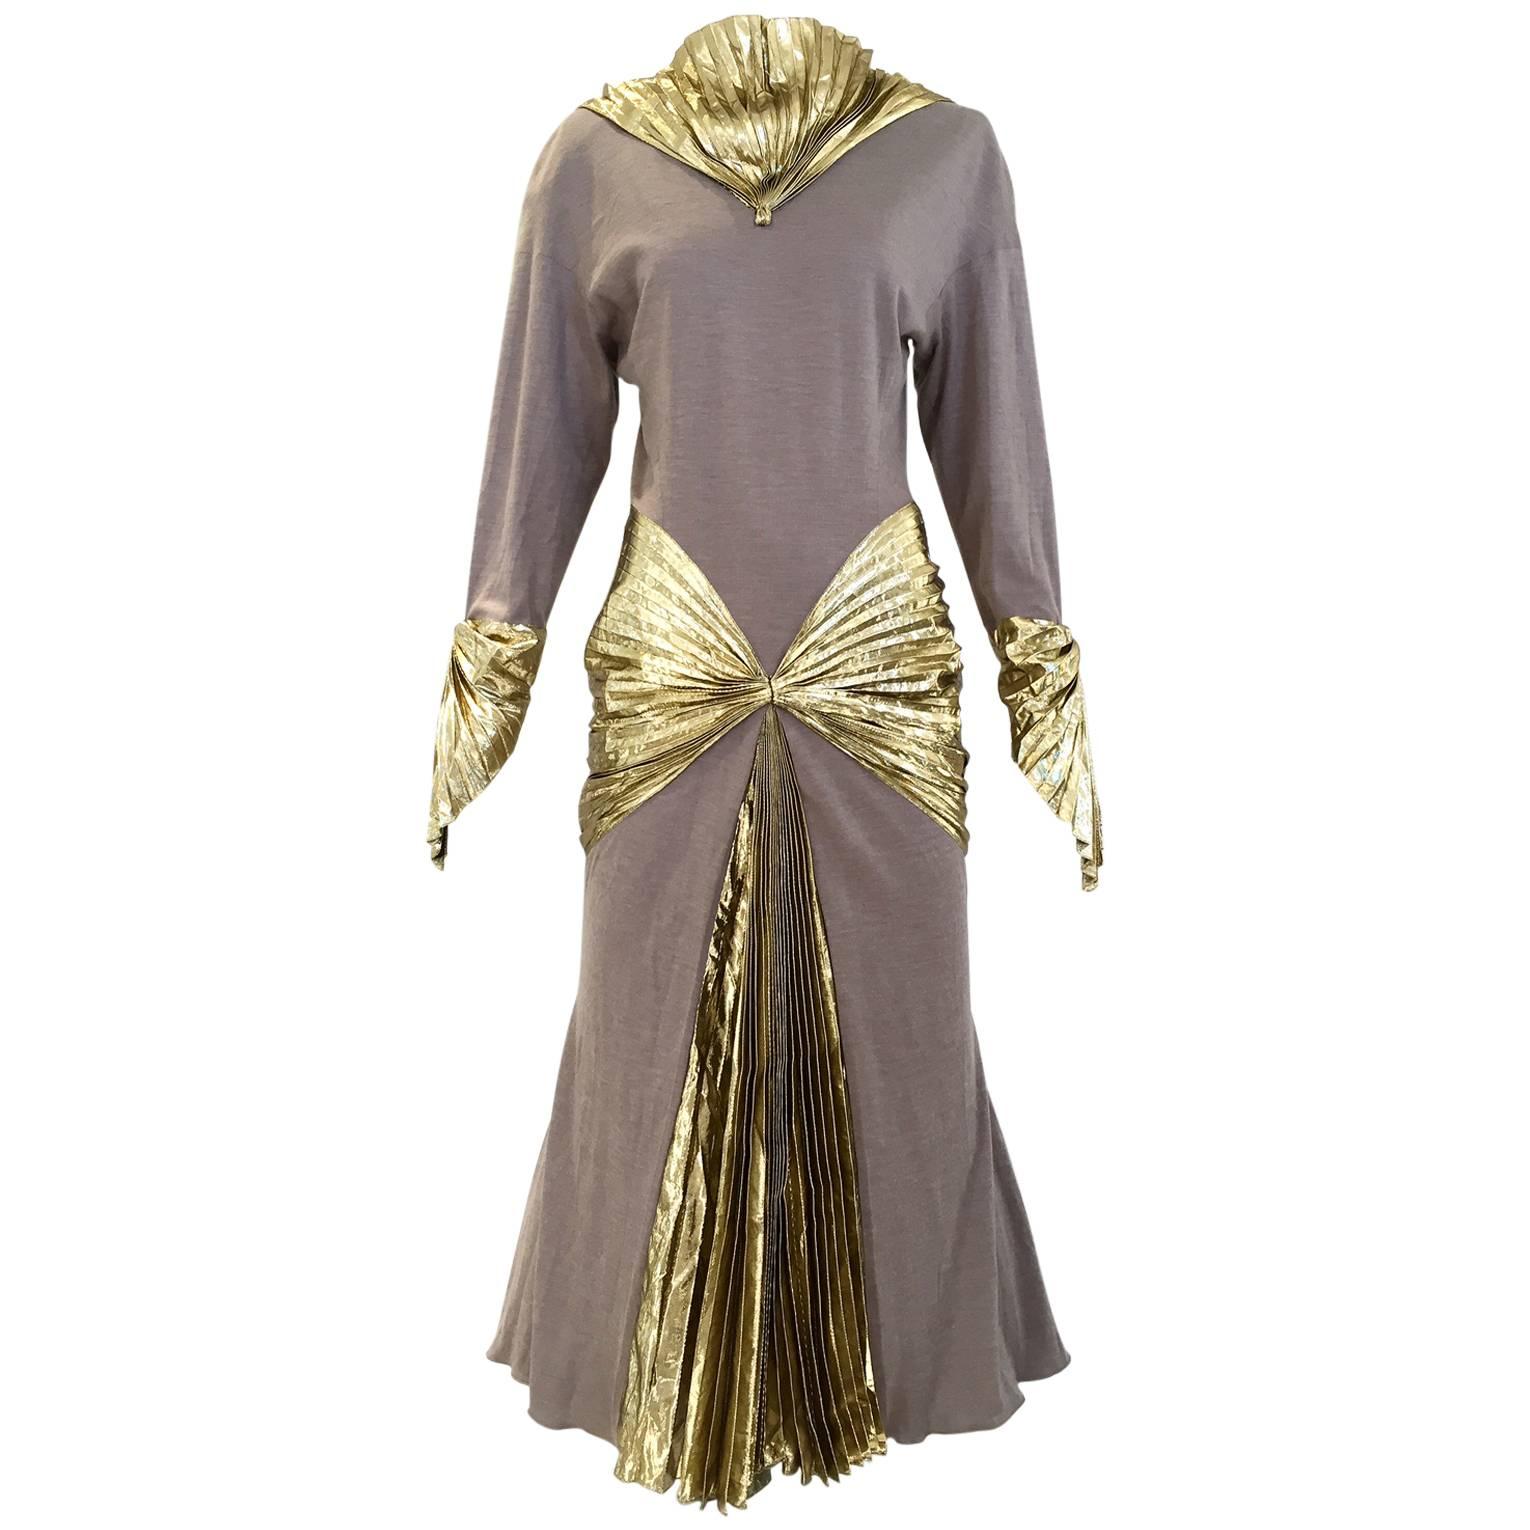 Iconic Vintage THIERRY MUGLER 1980s Grey Jersey and Gold lame 80s dress